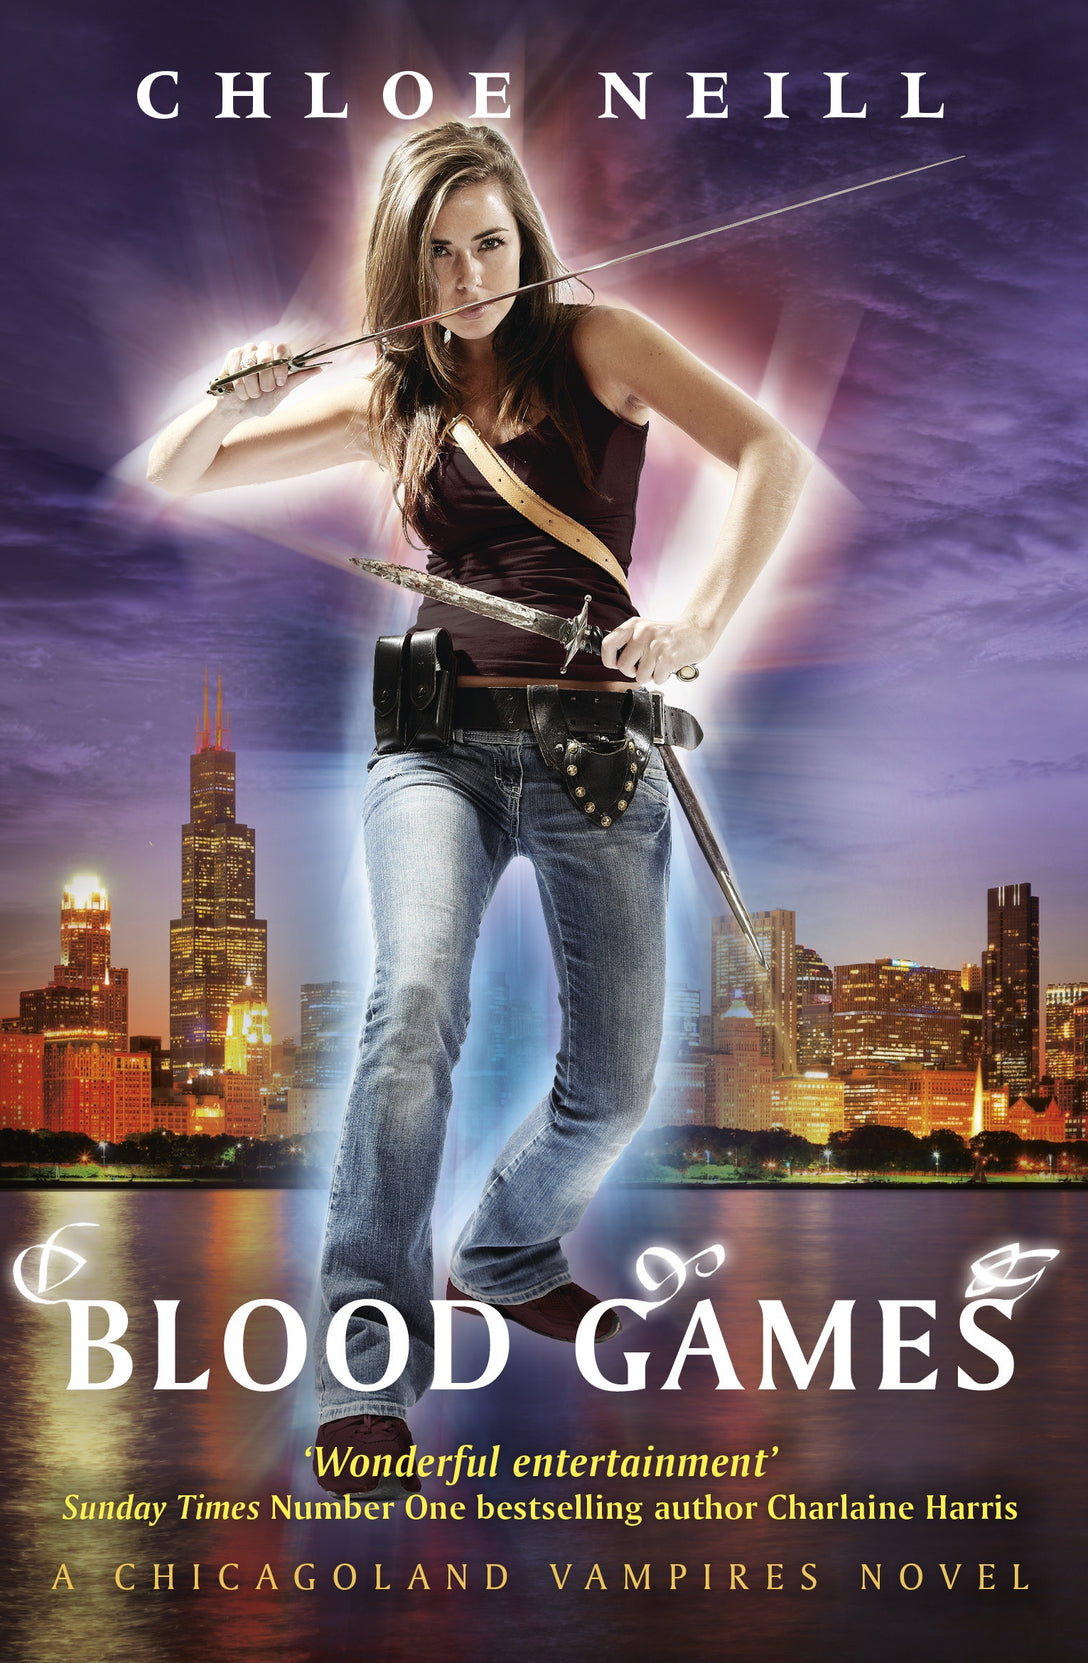 Blood Games by Chloe Neill